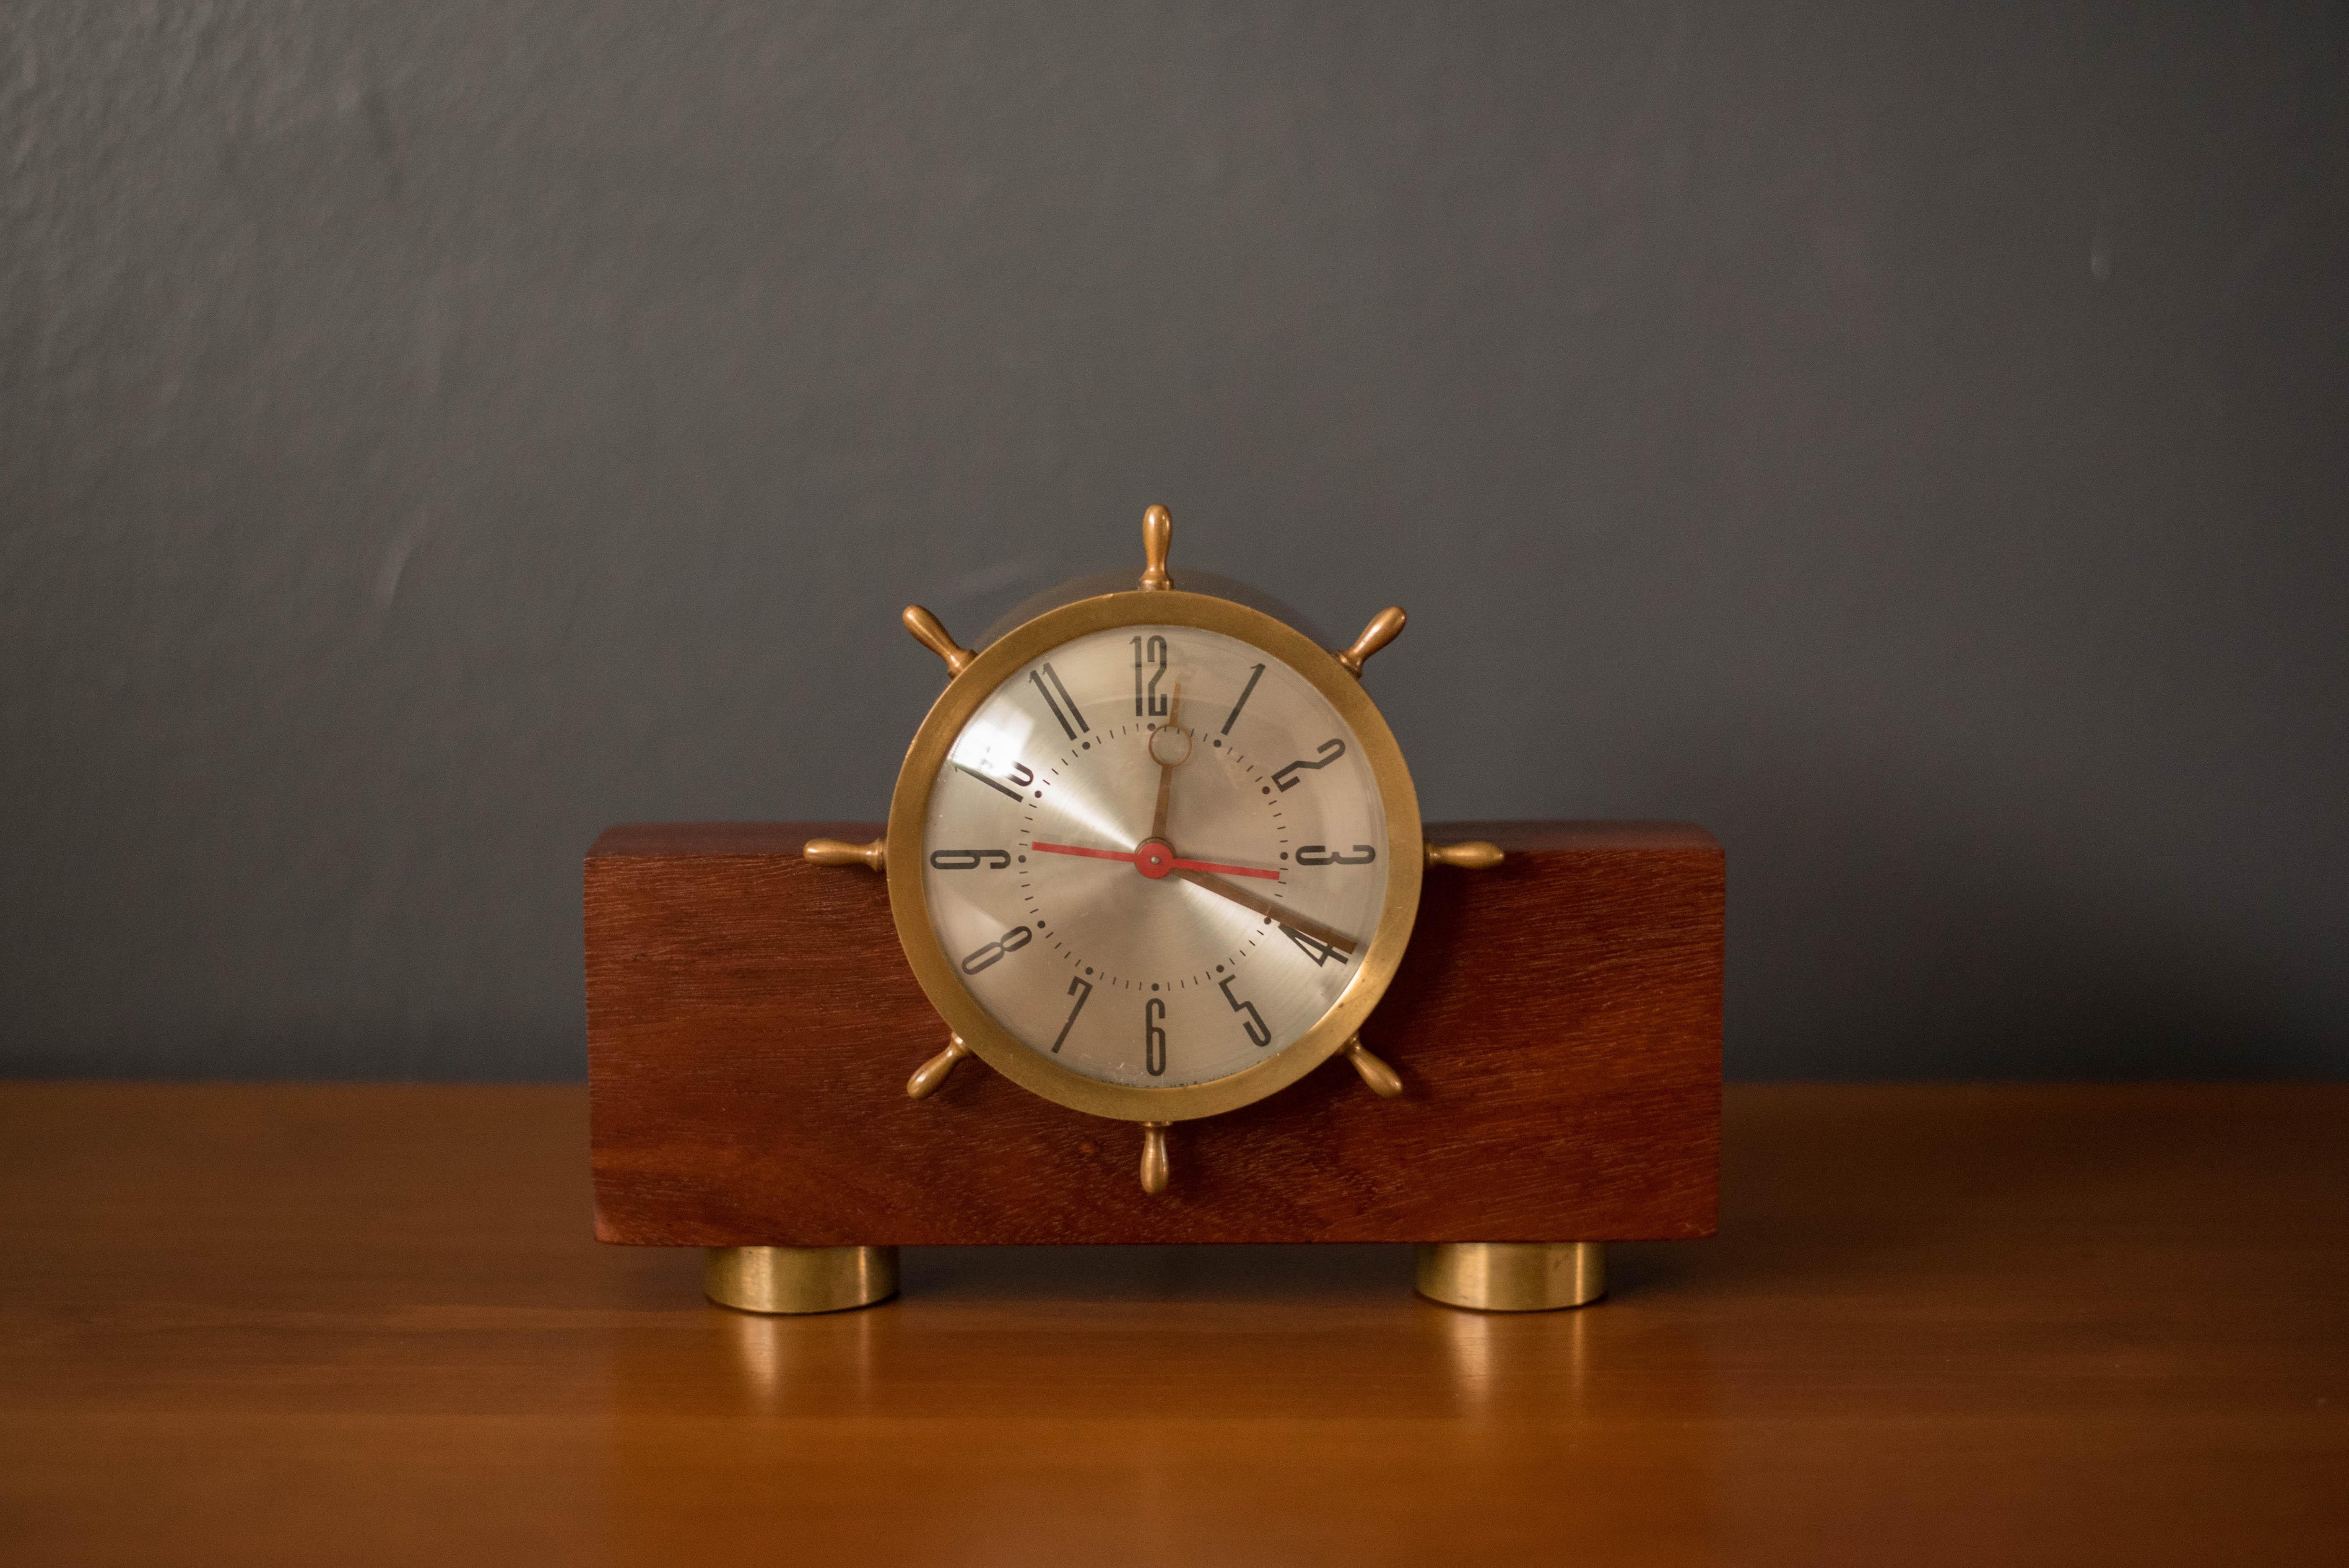 Mid Century Modern mantel clock manufactured by O.B. McClintock Clock Company circa 1950's. This piece features beautifully patinated brass and restored solid mahogany wood. The perfect accessory for a desktop, table, or mantle shelf. Keeps time